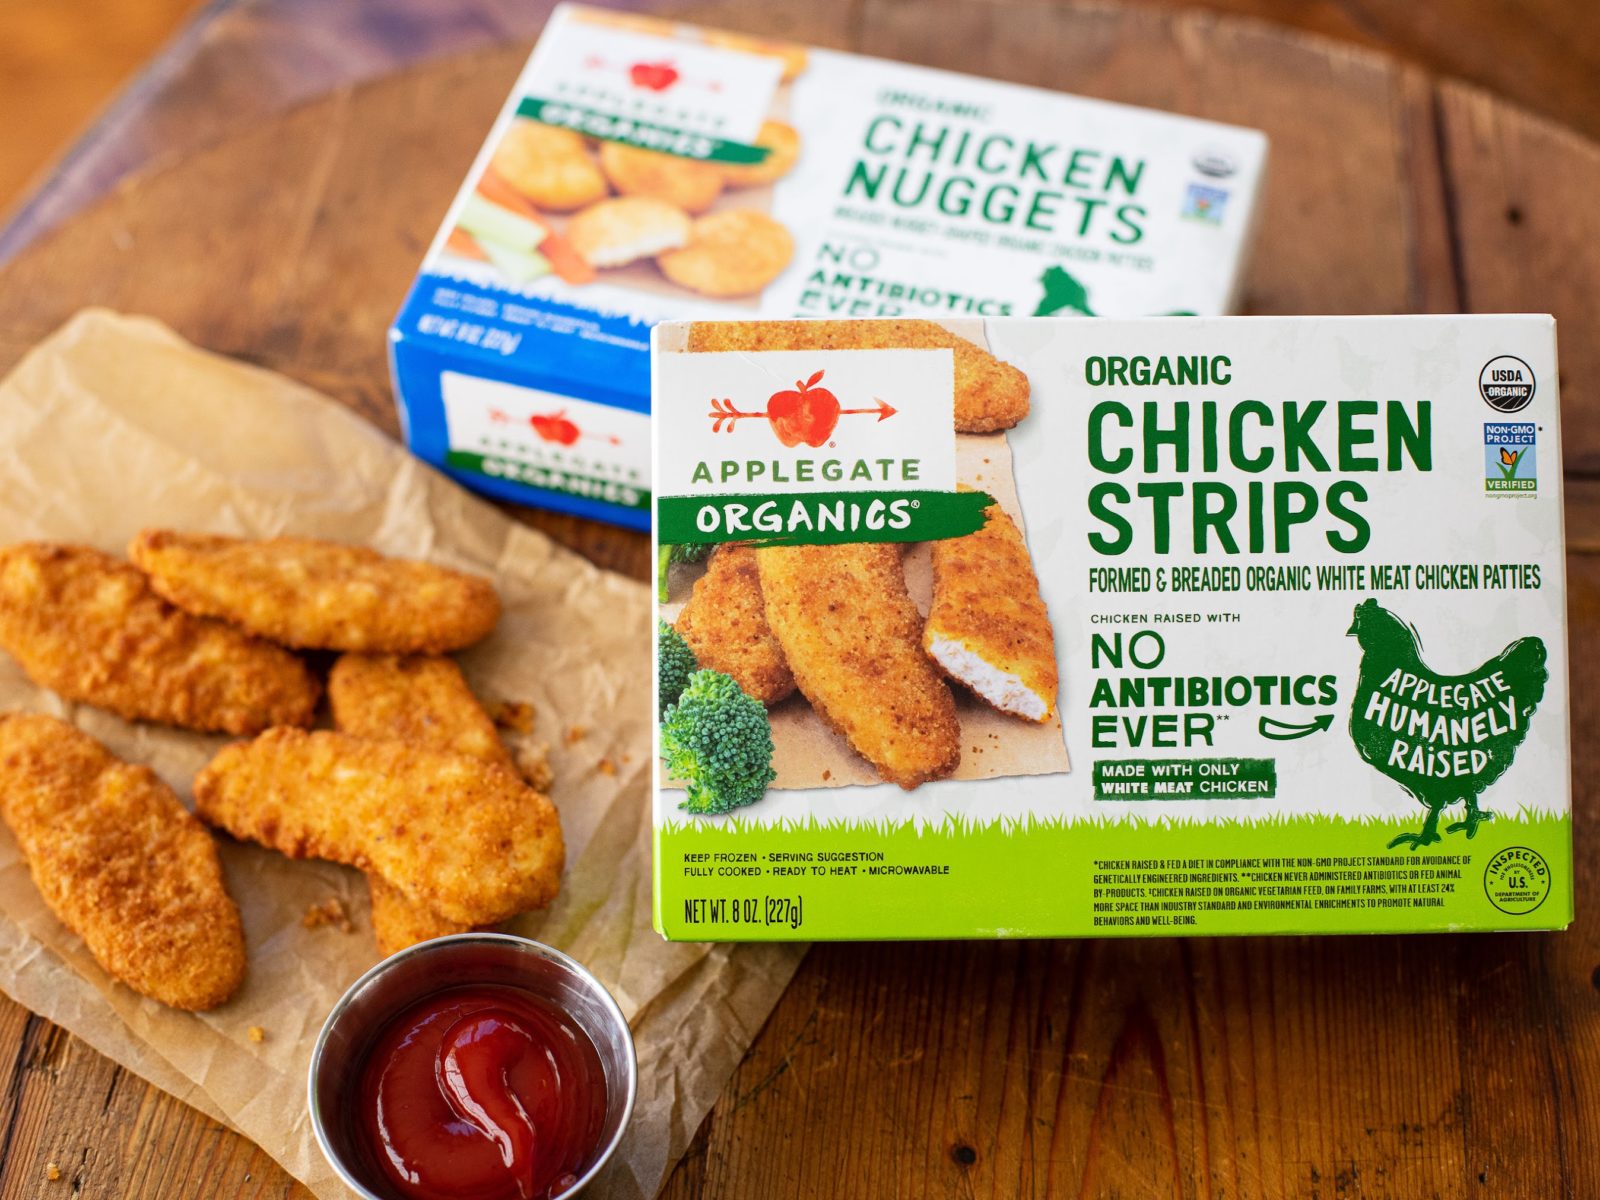 Get Applegate Organic Chicken Nuggets Or Strips Just $3.96 At Publix (Regular Price $9.69)